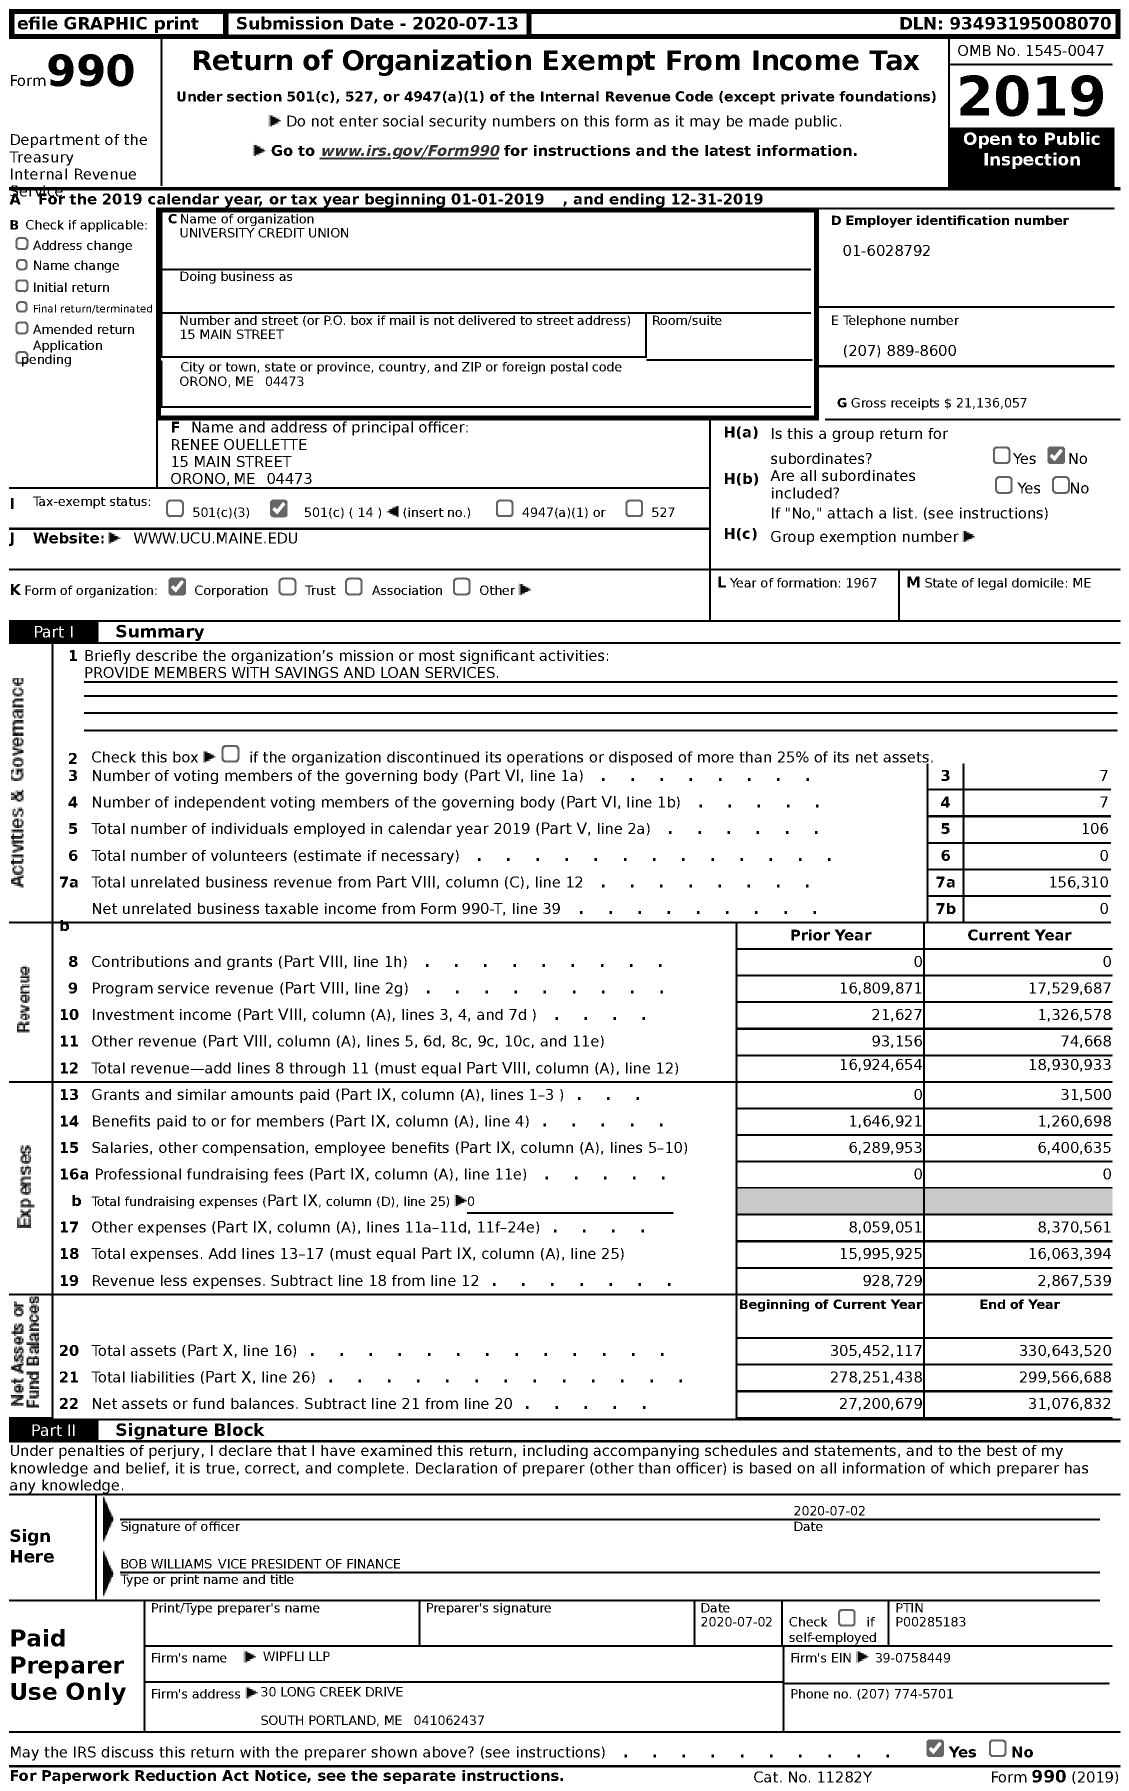 Image of first page of 2019 Form 990 for University Credit Union (UCU)